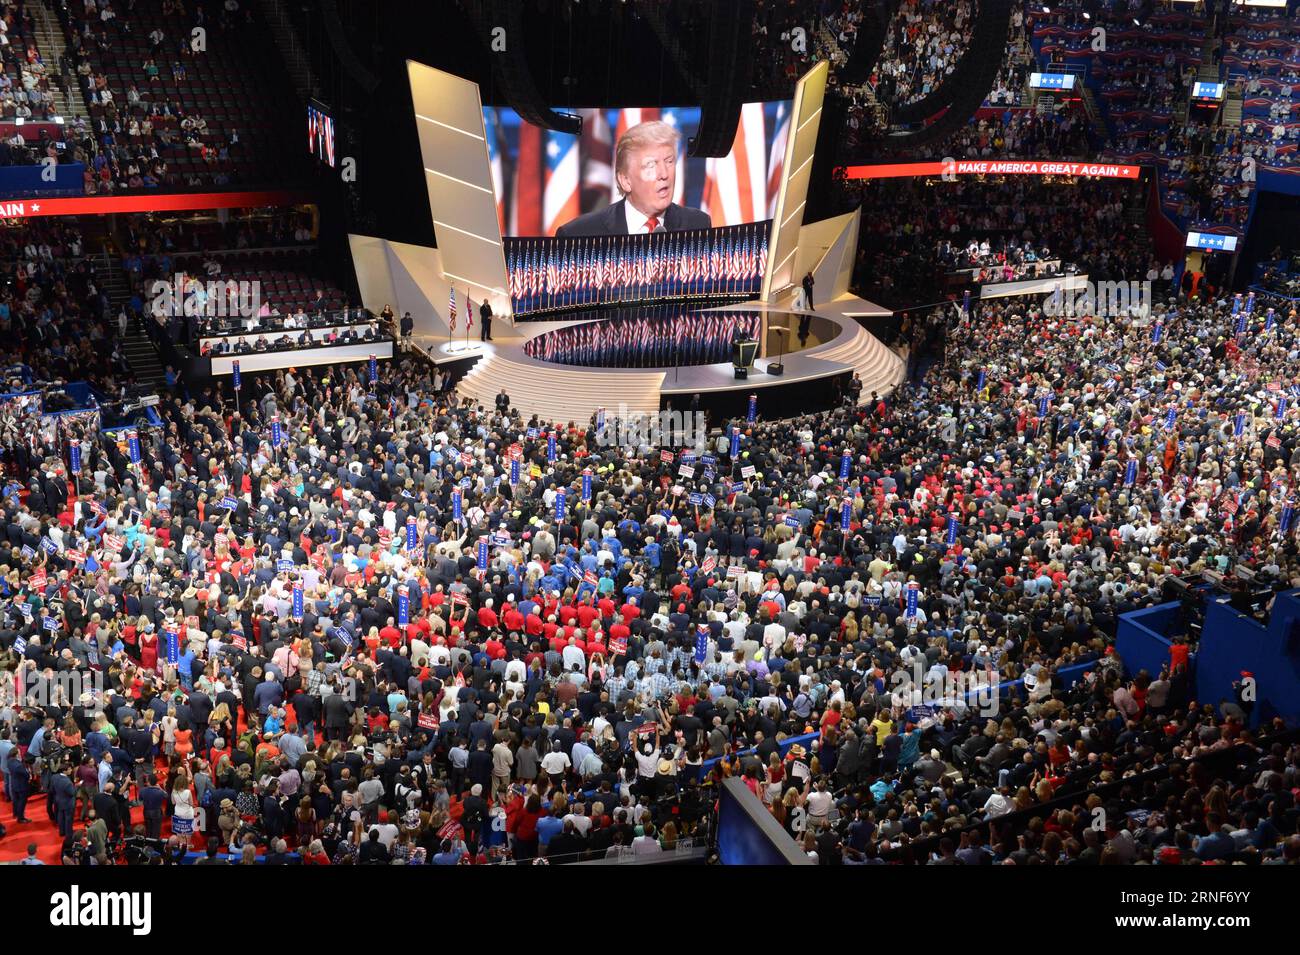 (160722) -- CLEVELAND, July 21, 2016 -- Donald Trump takes the stage on the last day of the Republican National Convention in Cleveland, Ohio, the United States, July 21, 2016. New York billionaire Donald Trump officially accepted the presidential nomination of the U.S. Republican Party Thursday night on the final day of the Republican National Convention. ) US-CLEVELAND-TRUMP-GOP-PRESIDENTIAL NOMINATION-ACCEPTION yinxbogu PUBLICATIONxNOTxINxCHN   160722 Cleveland July 21 2016 Donald Trump Takes The Stage ON The Load Day of The Republican National Convention in Cleveland Ohio The United States Stock Photo